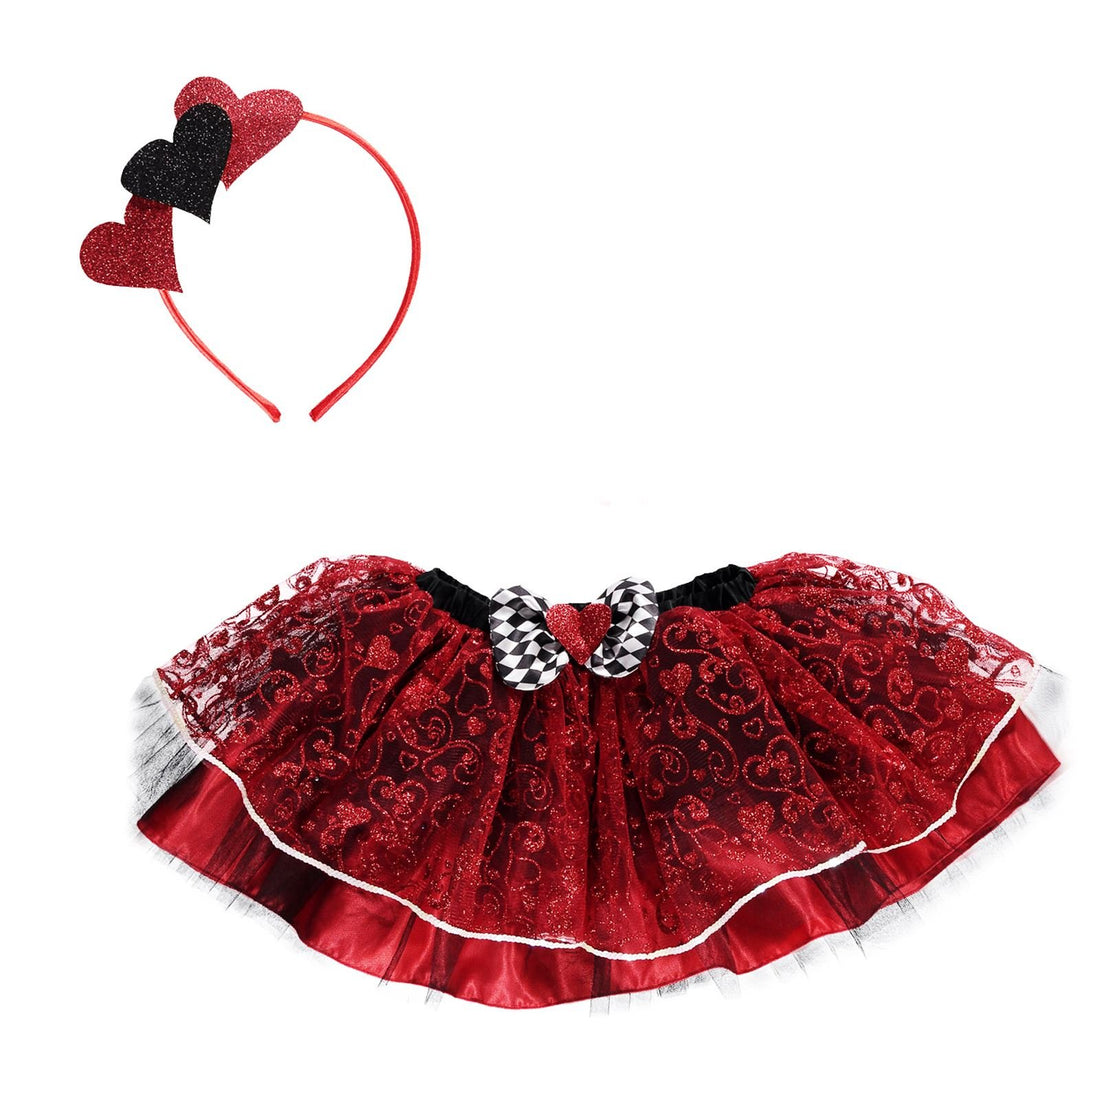 Queen of Hearts Tutu with Headband Medium/Large to fit waist 24-27in (62/70cm)